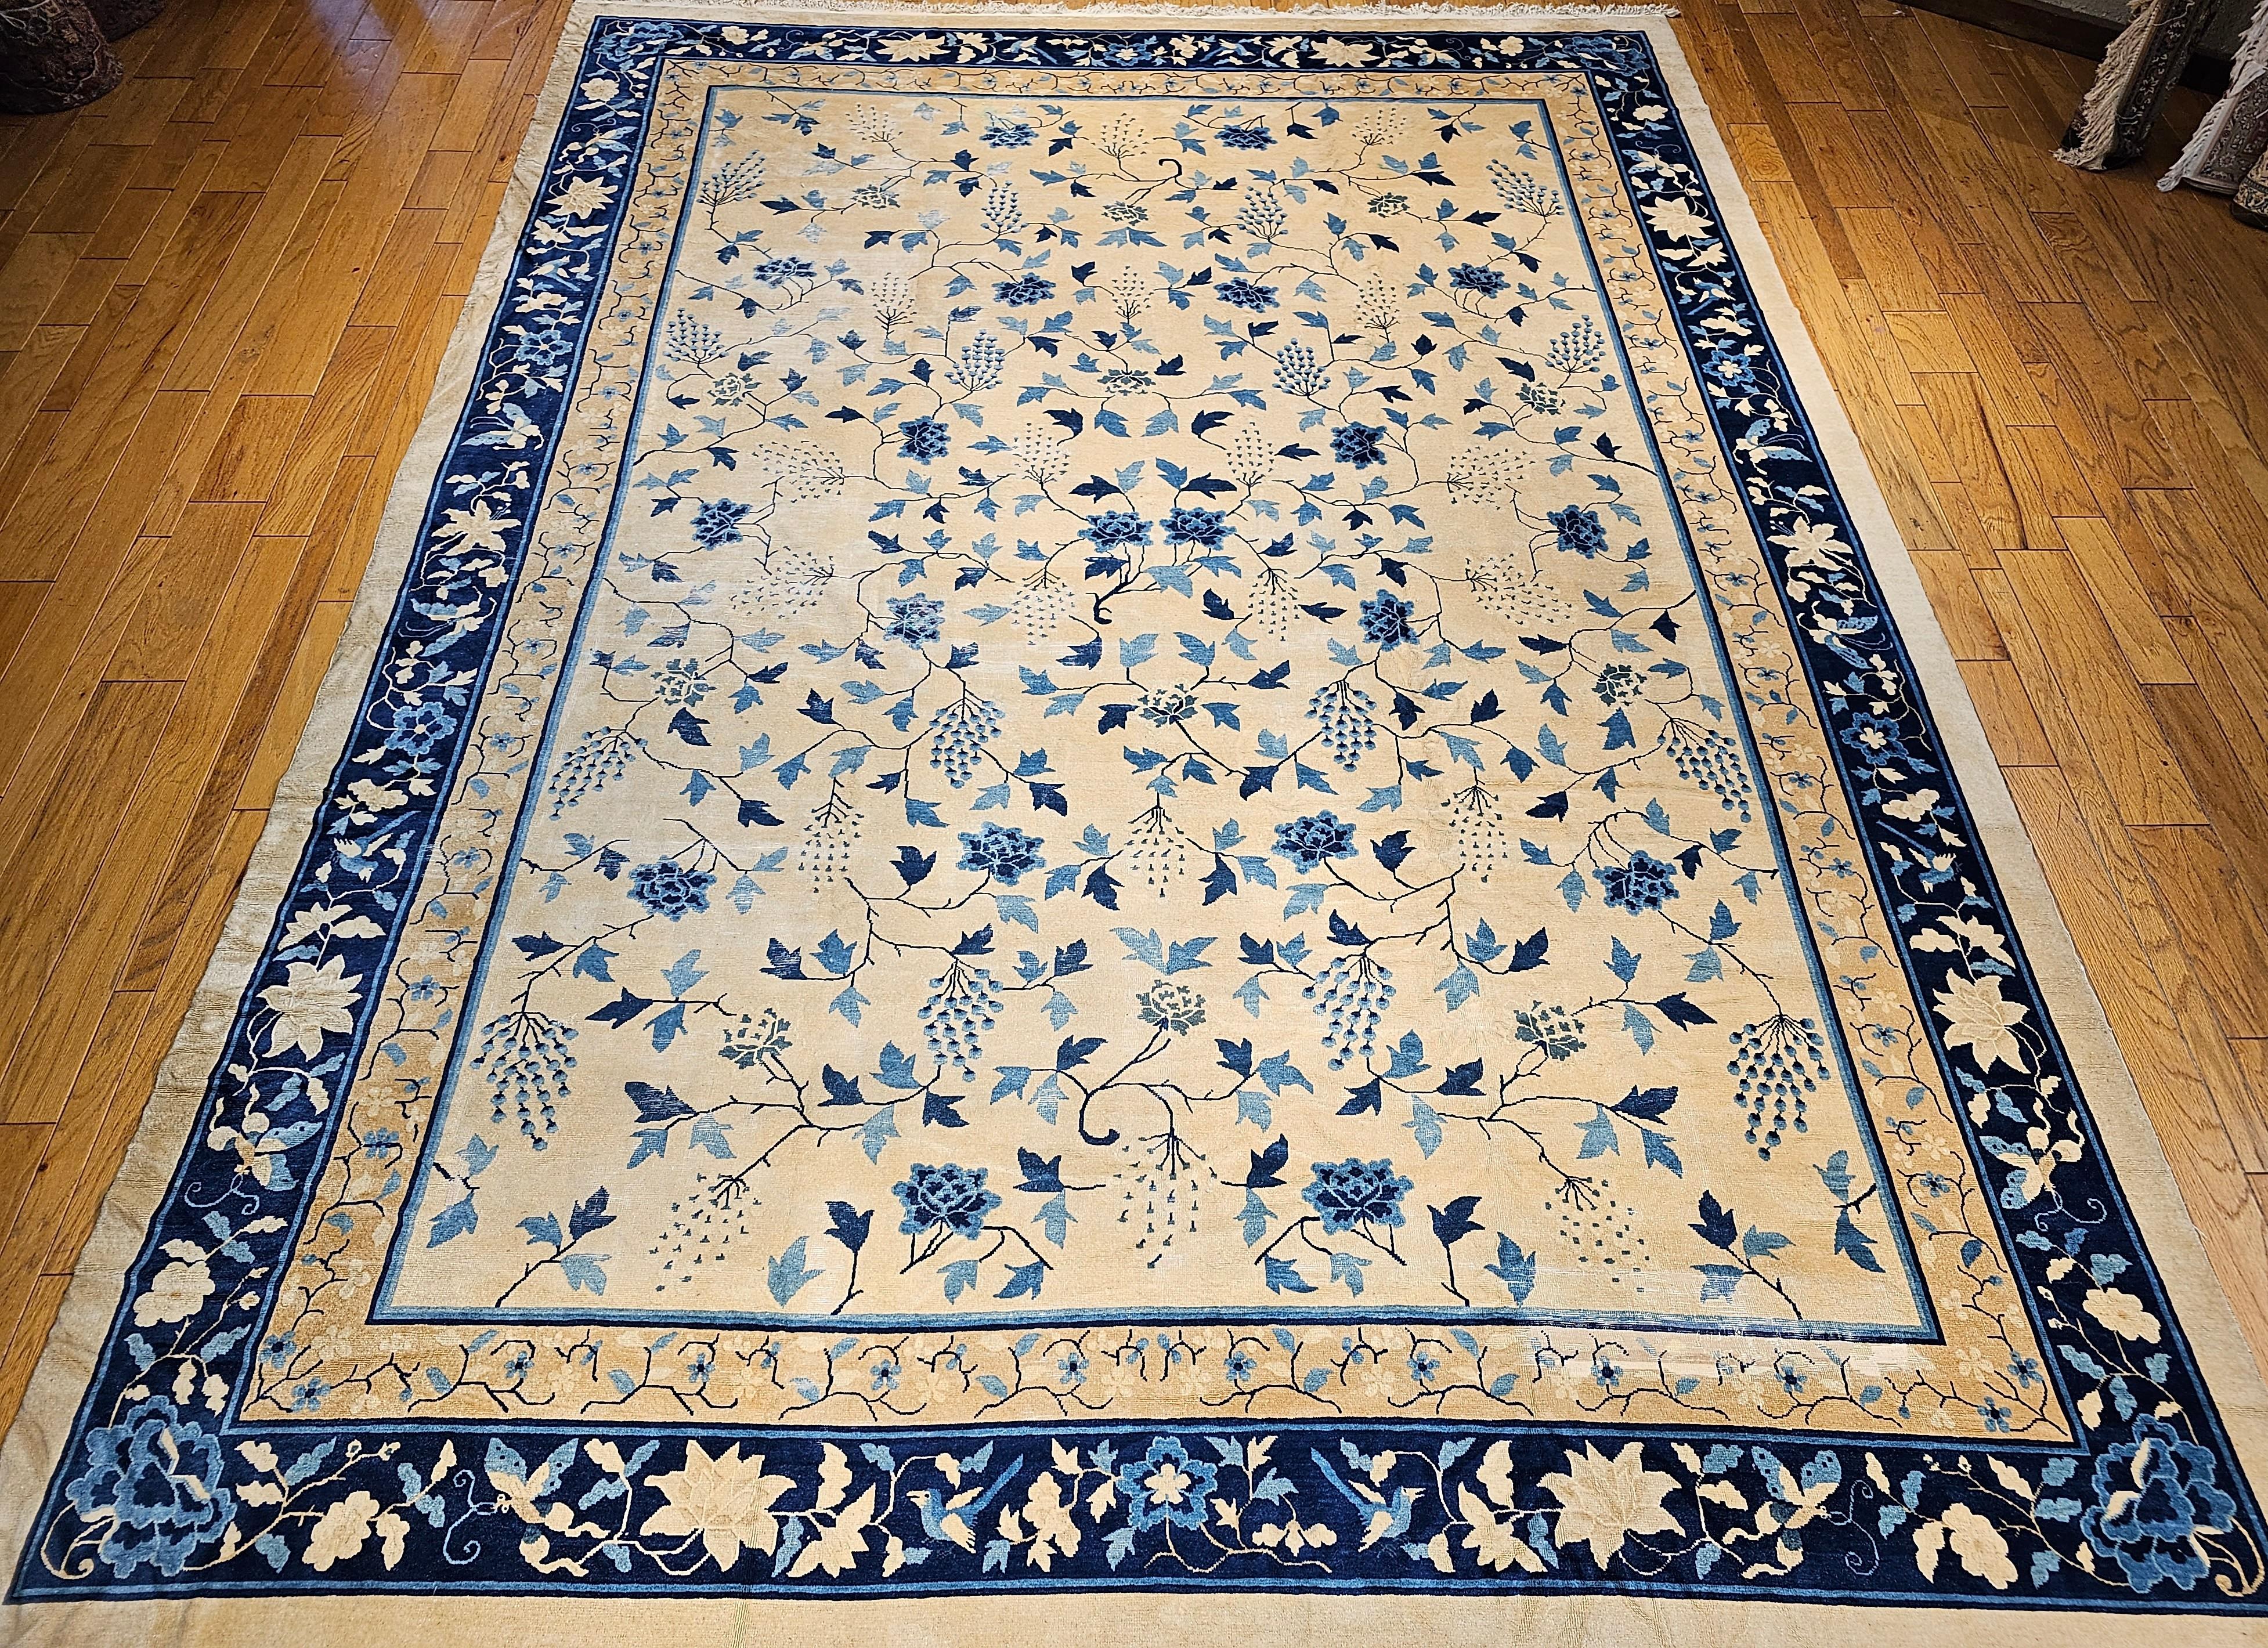 Late 19th Century Chinese Peking oversize rug in an all-over leaf pattern in ivory, and blue colors.  The weave in this beautiful rare rug is very fine and the rug has a wonderful color palette with a cream/antique white color field and a blue color